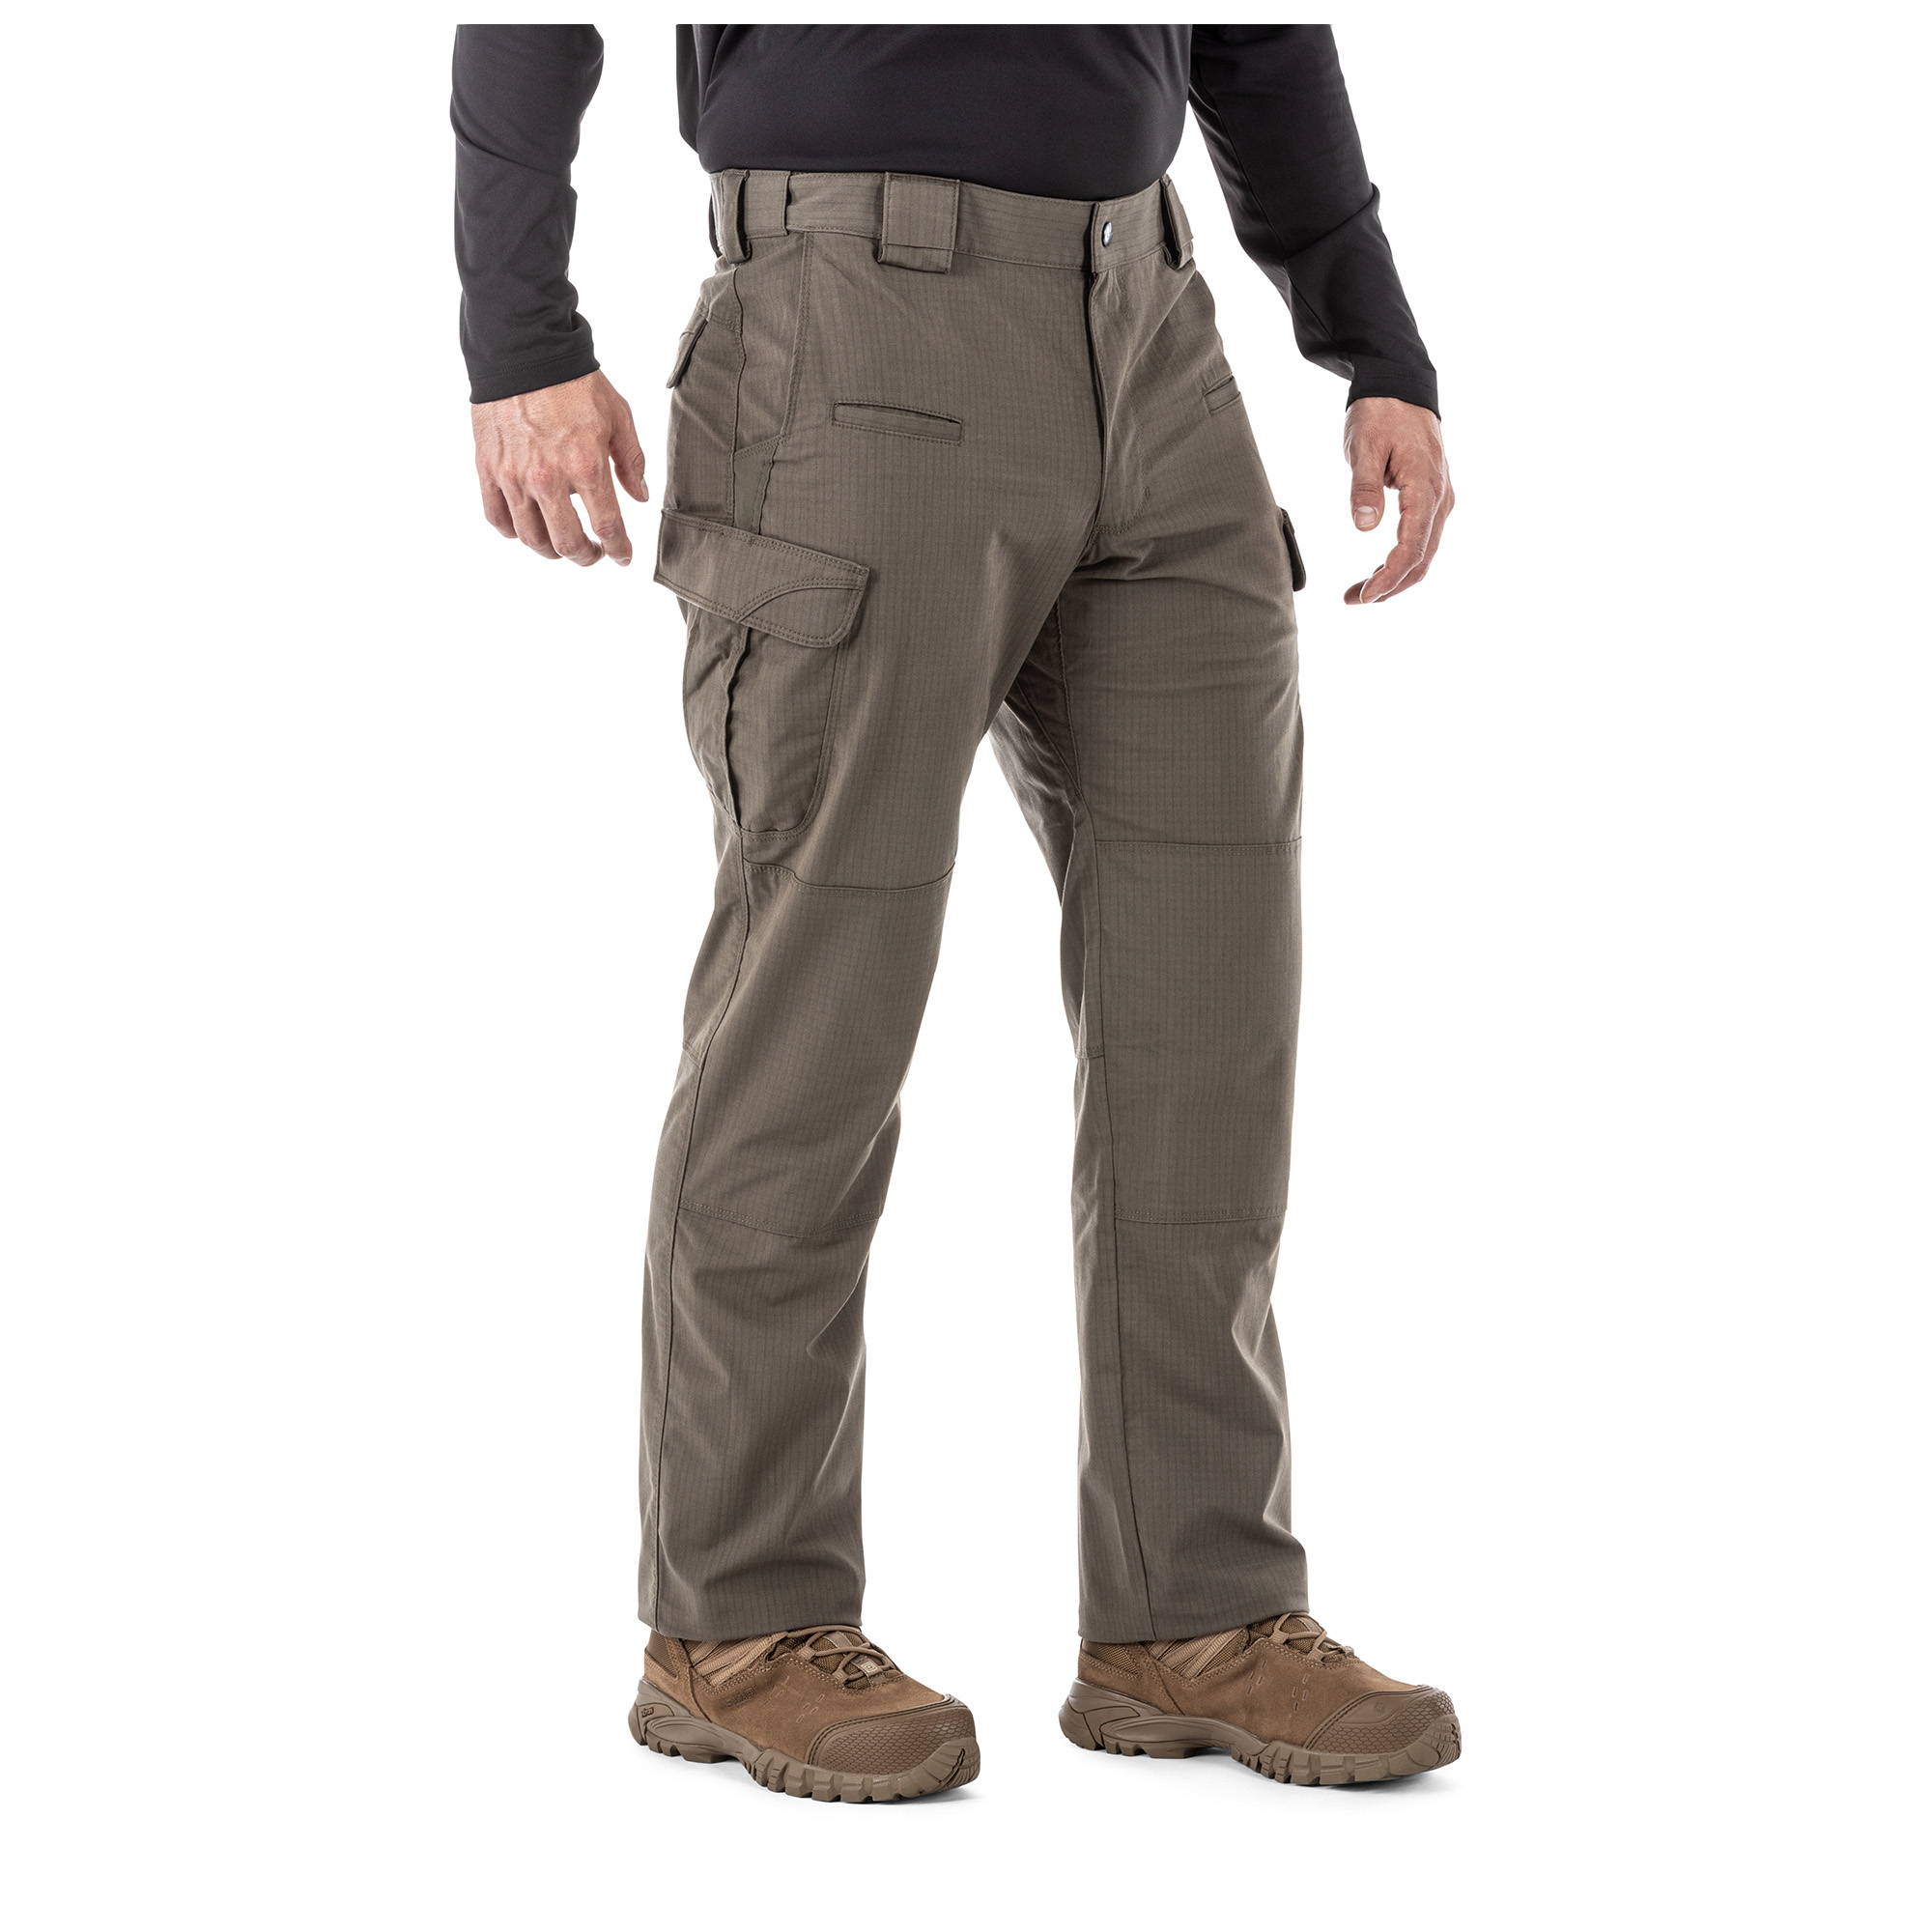 THE ICON PANT – 5.11 Tactical Japan